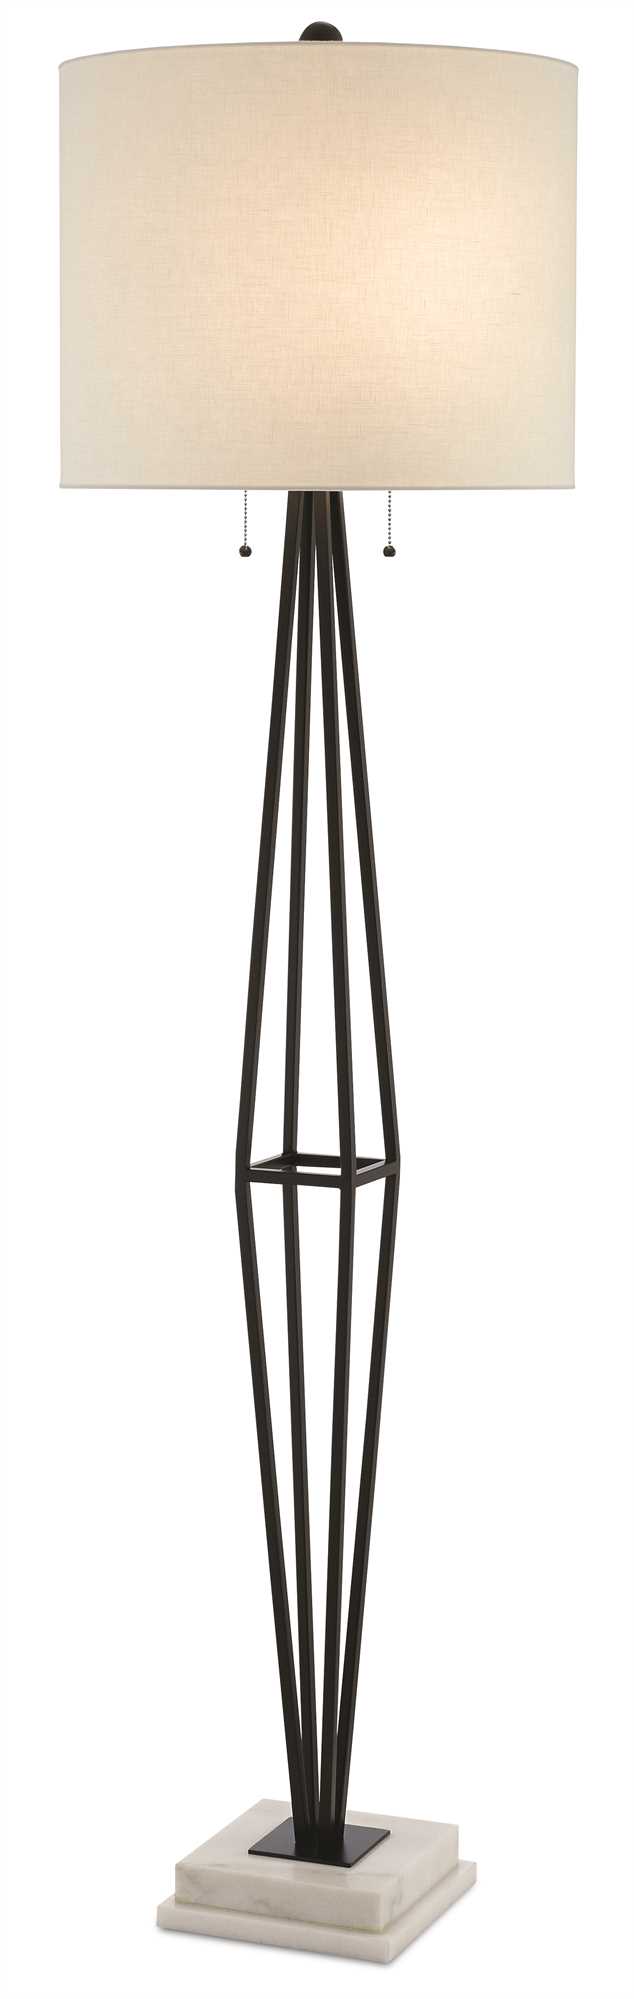 Currey and Company Colton Floor Lamp 8000-0044